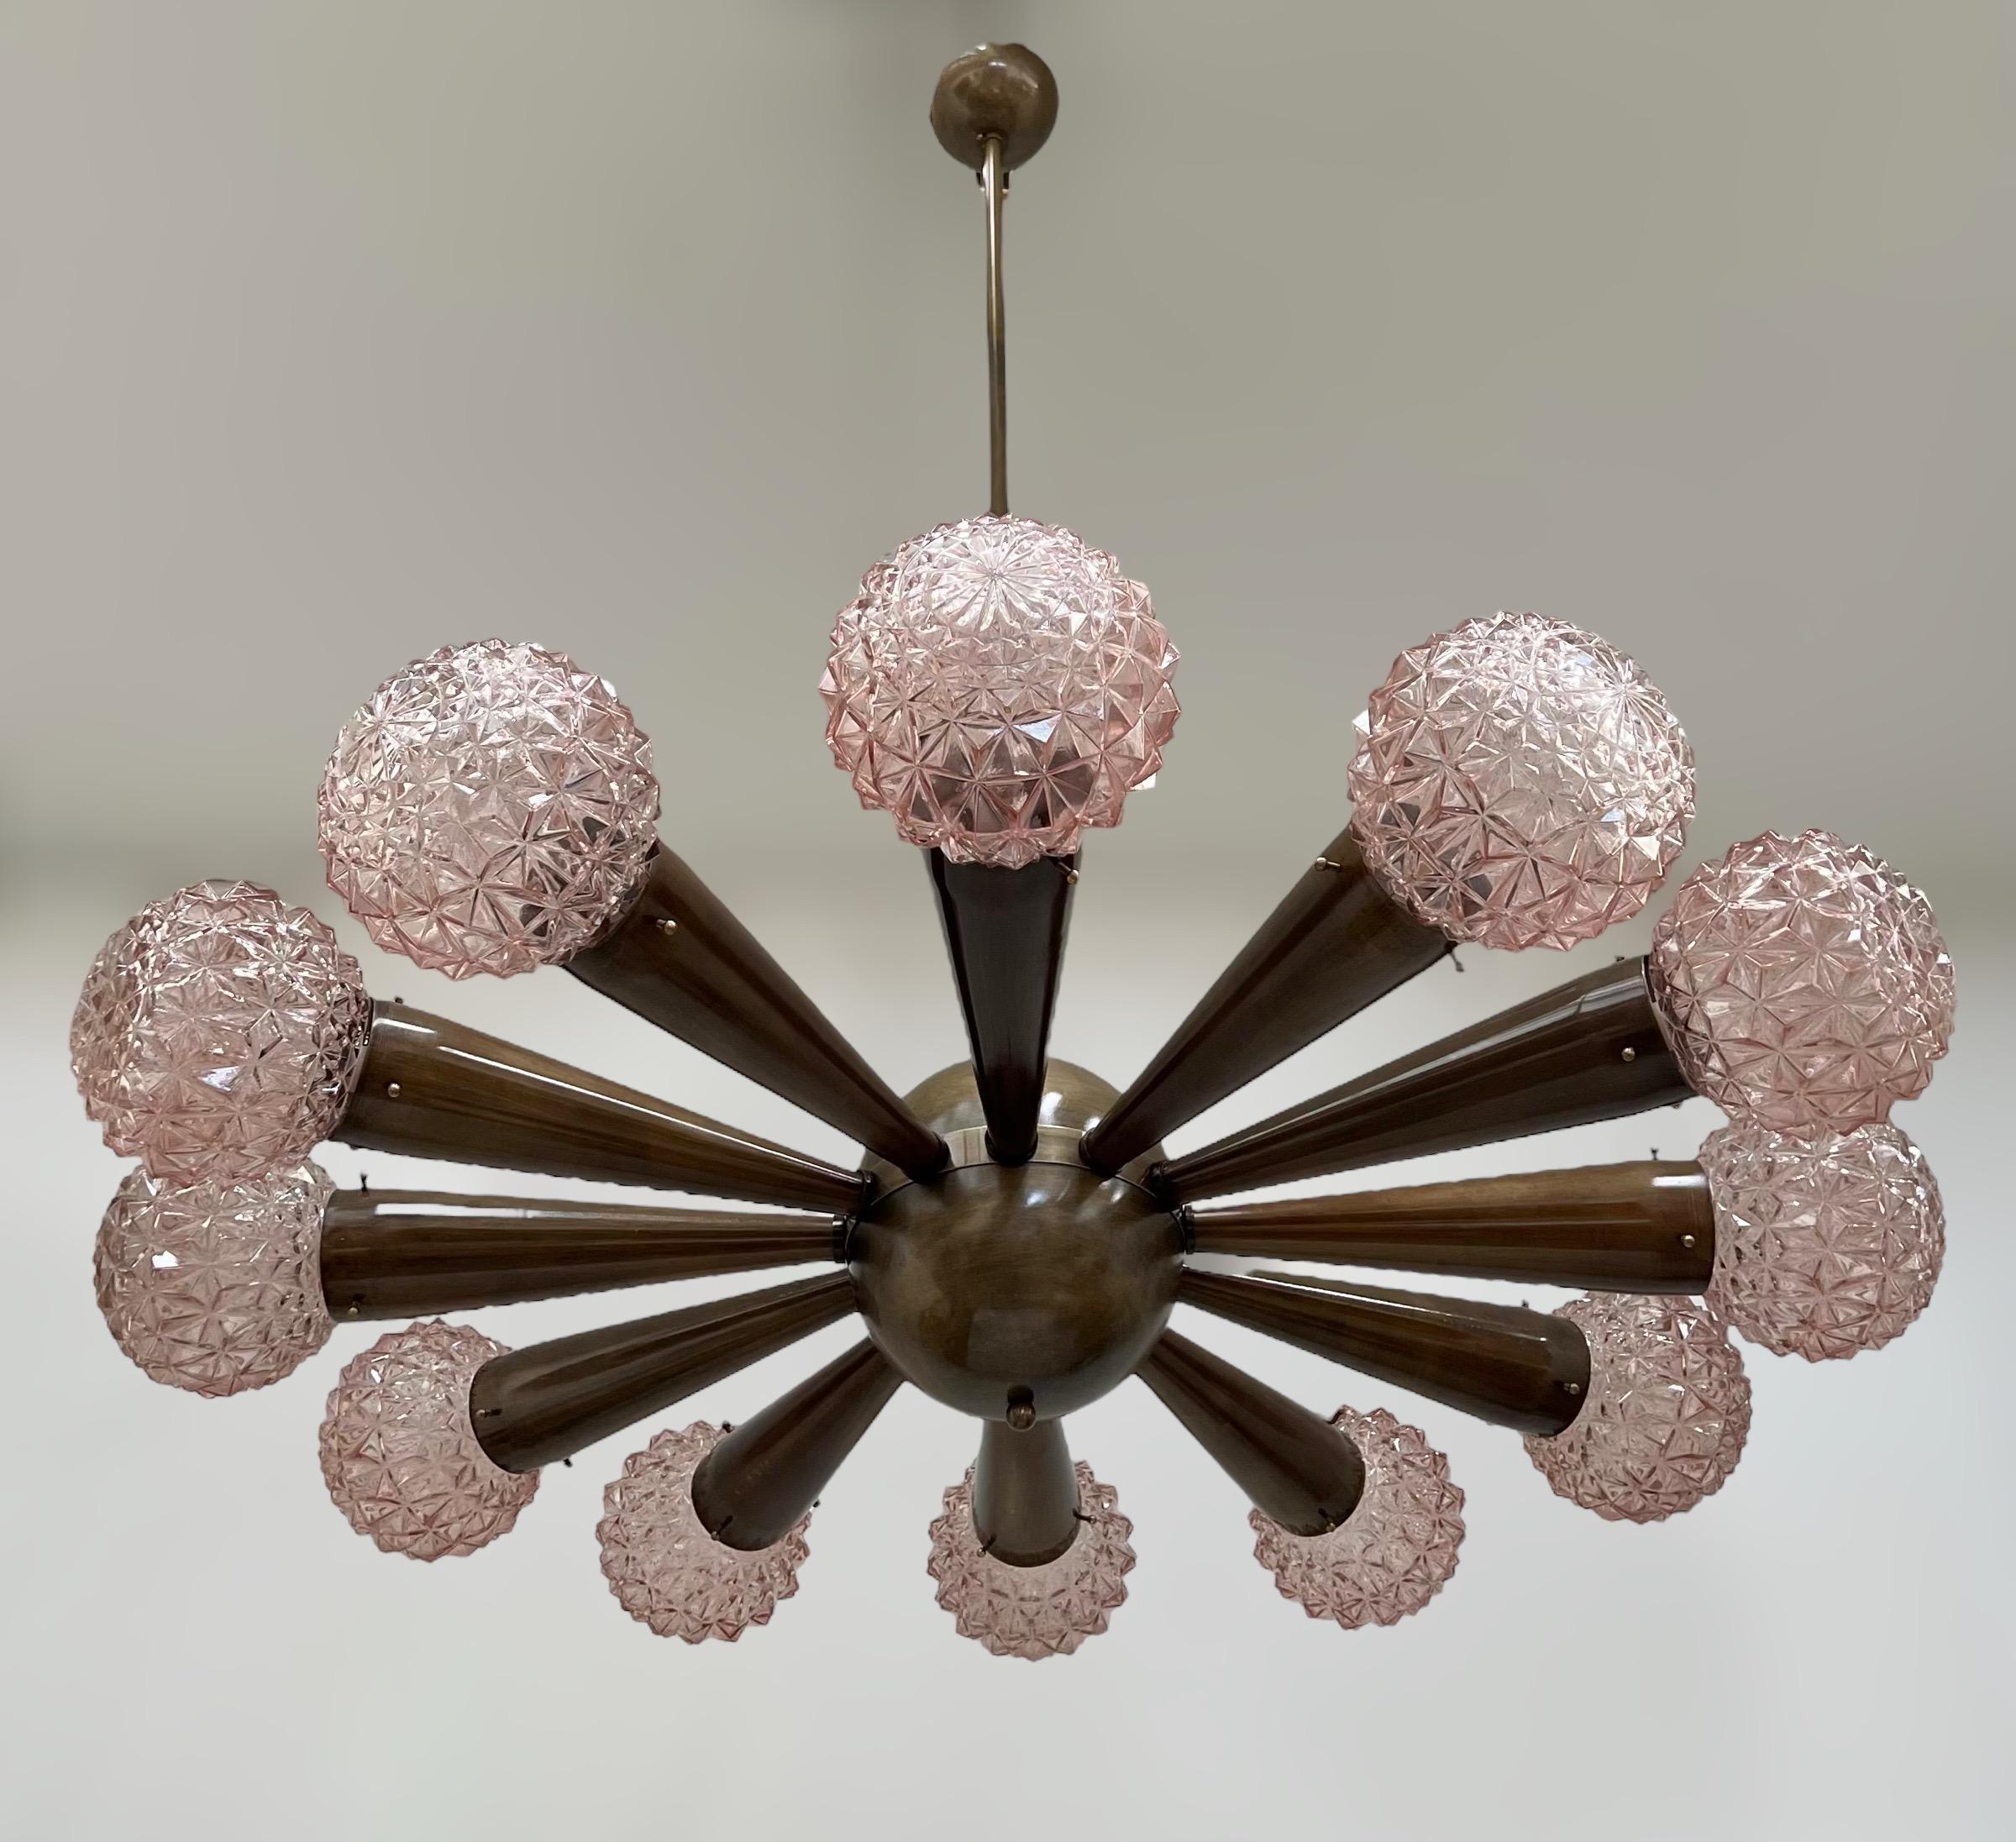 Italian chandelier with pink faceted Murano glass shades, mounted on bronzed finish frame / Designed by Fabio Bergomi for Fabio Ltd / Made in Italy
12 lights / E12 or E14 type / max 40W each
Measures: Diameter 43 inches / Height 49 inches including